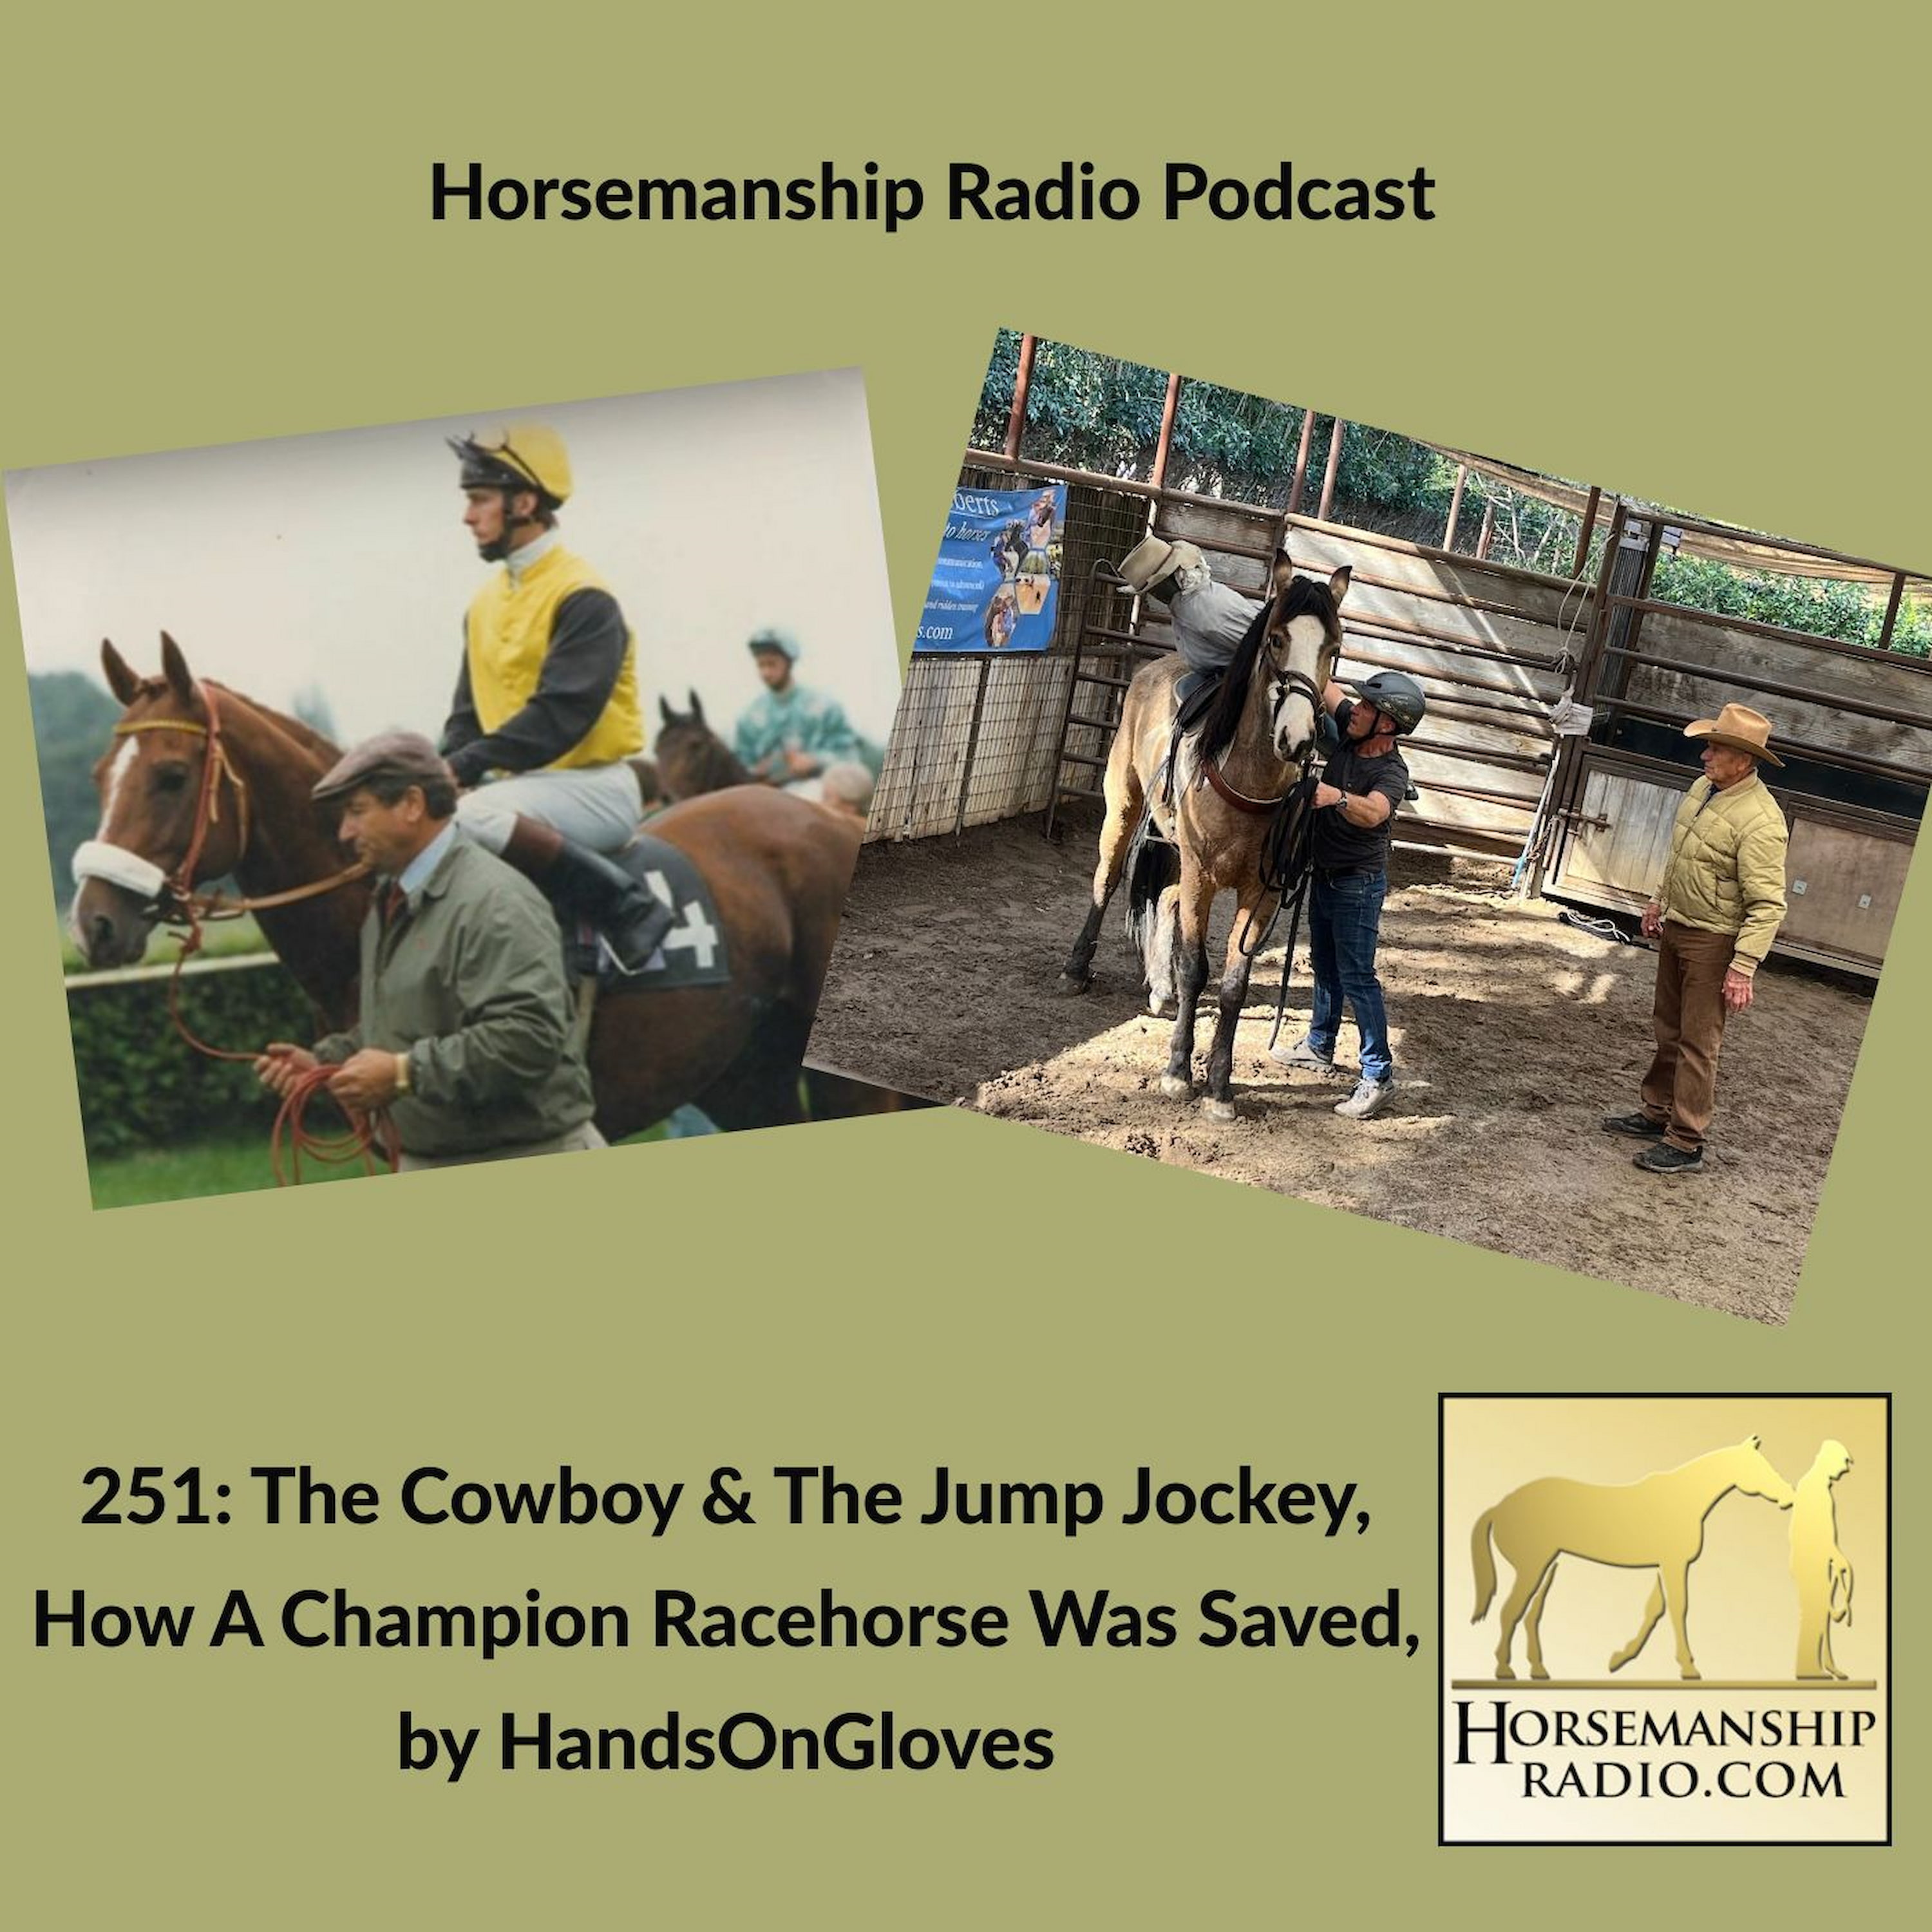 251: The Cowboy & The Jump Jockey, How A Champion Racehorse Was Saved, by HandsOnGloves